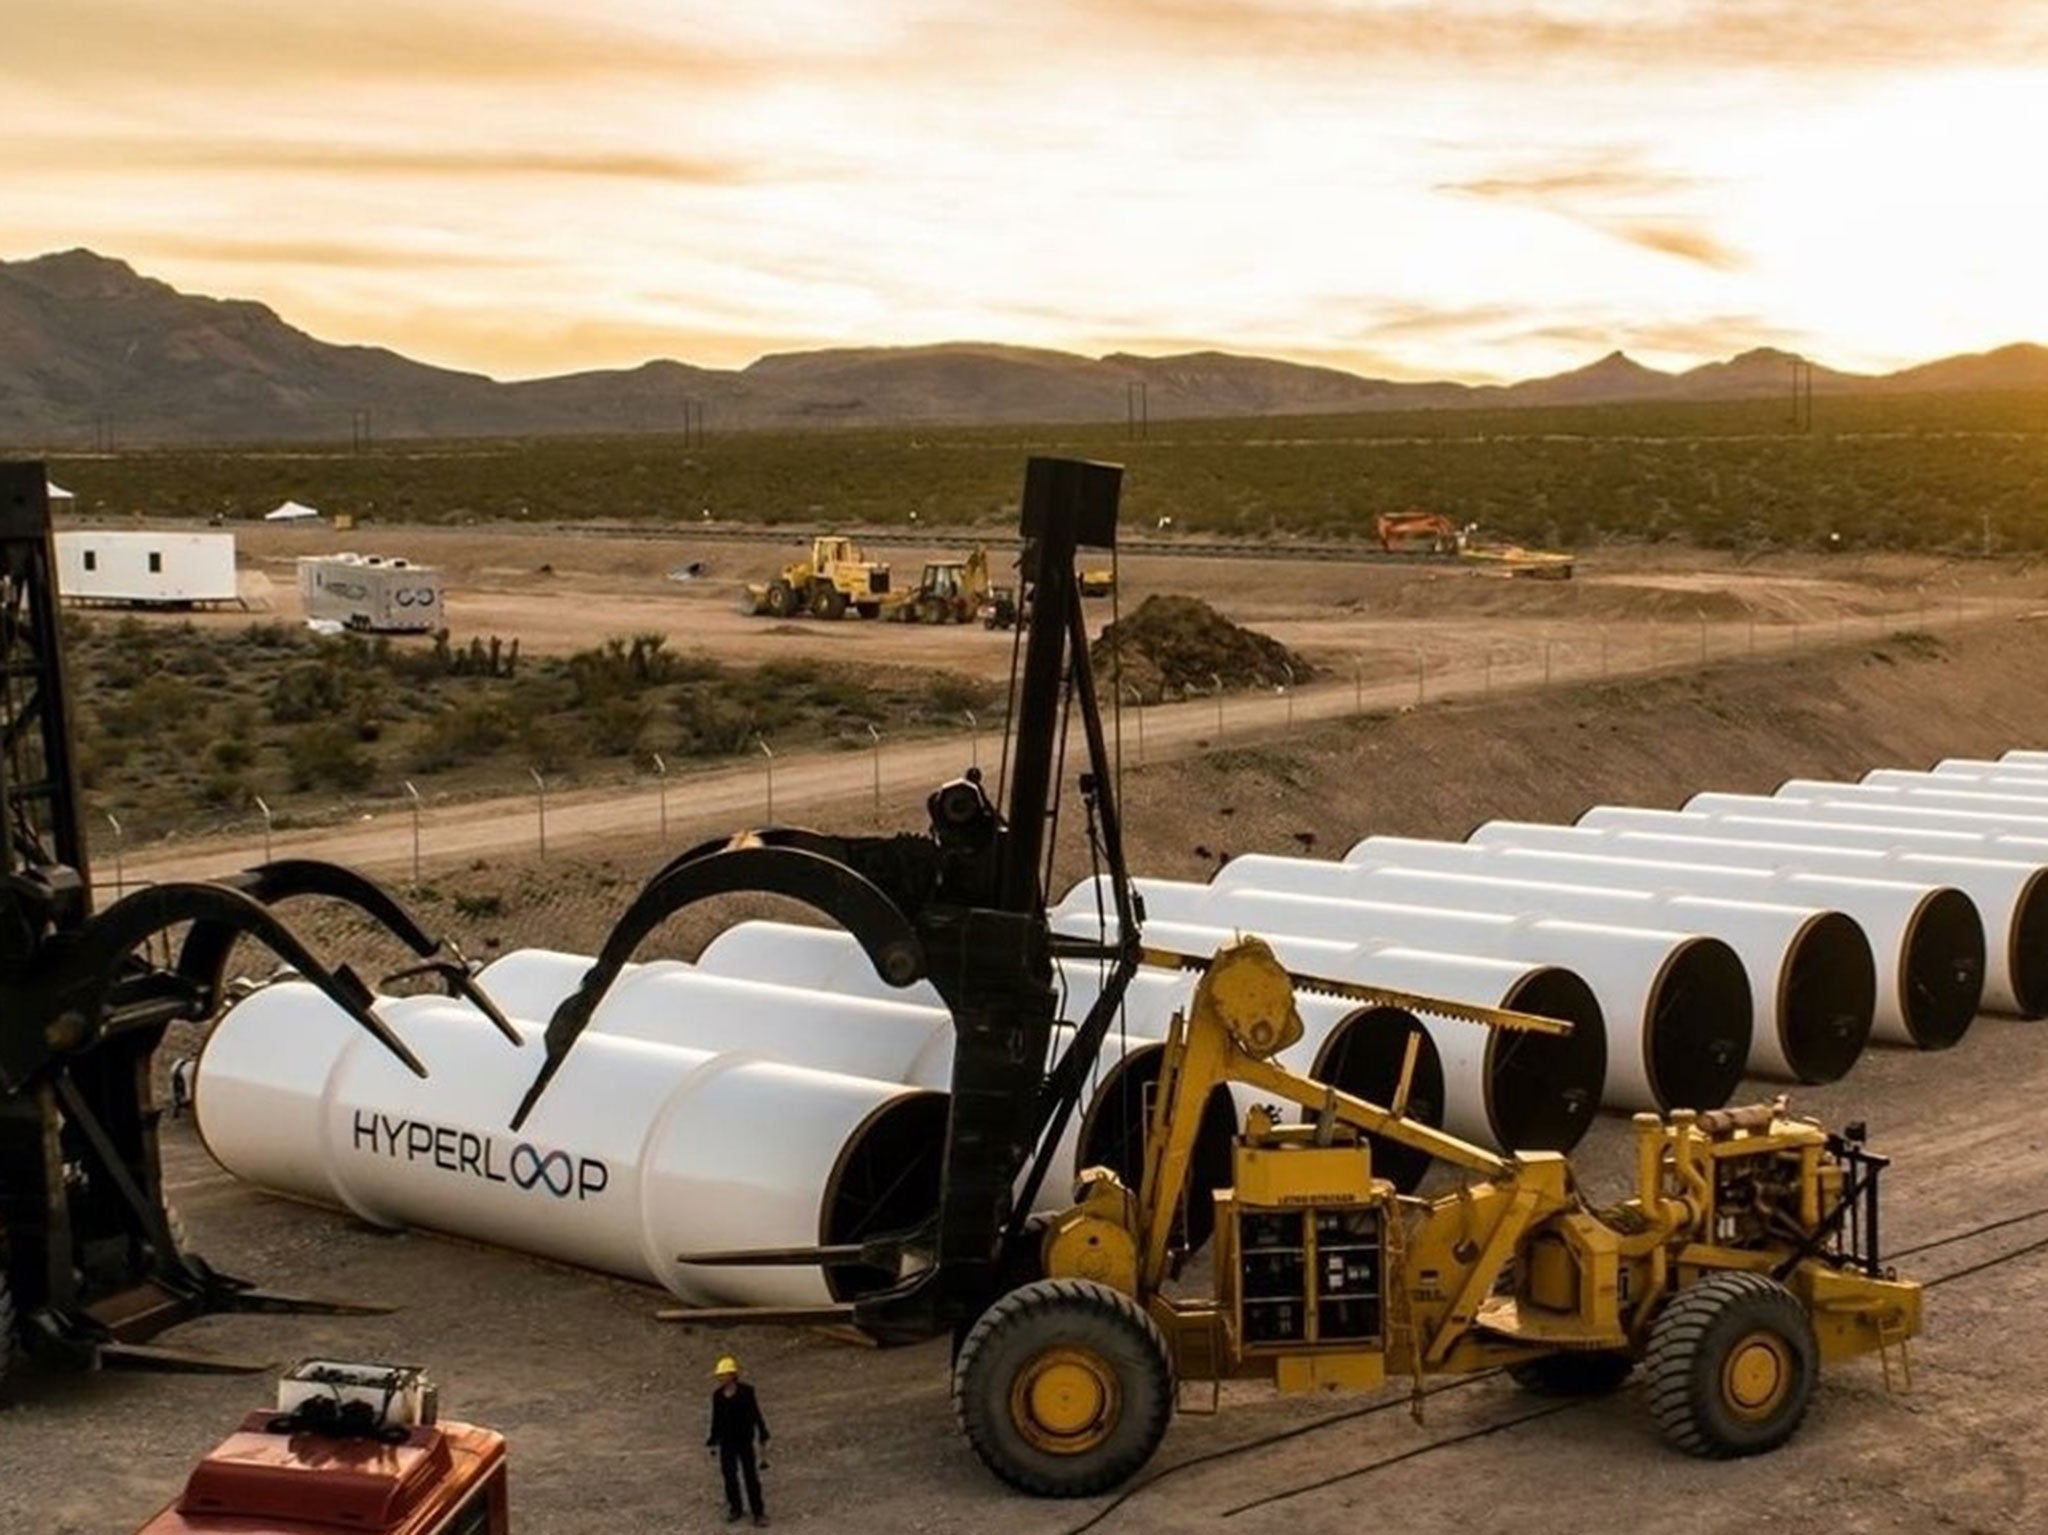 Virgin Hyperloop One is one of two leading companies working on the hypersonic vacuum transport system